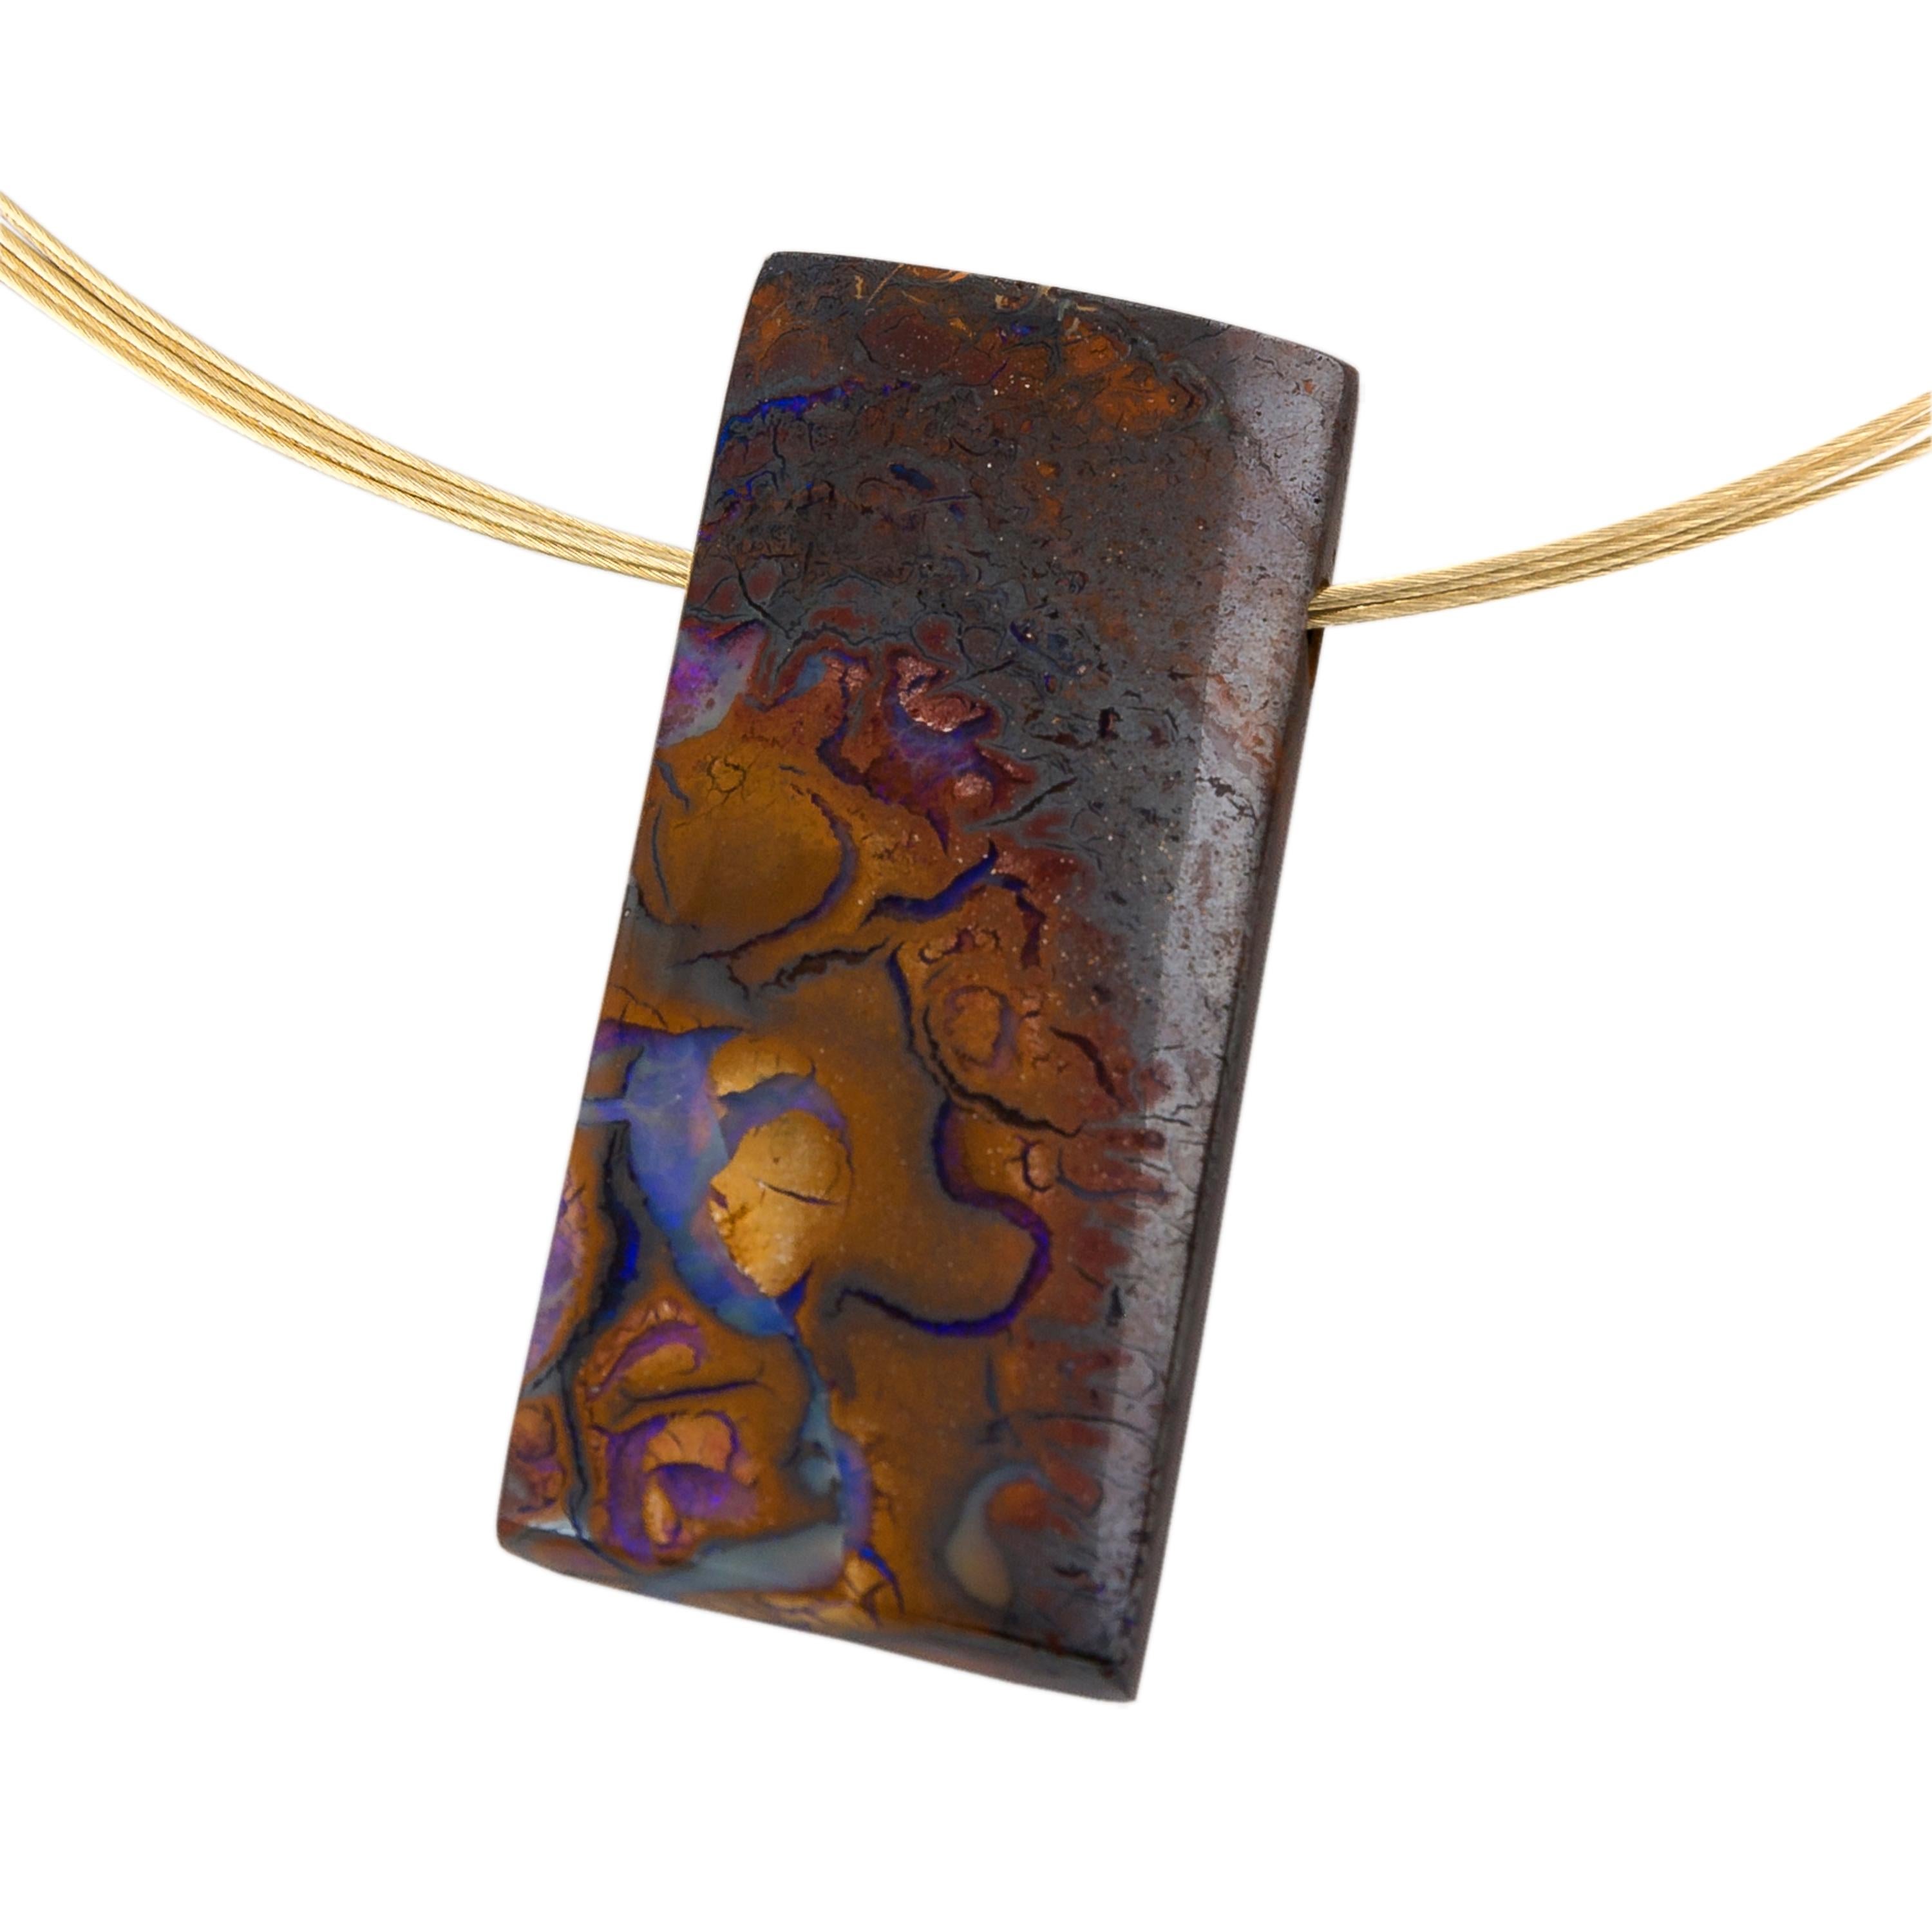 A stunning Australian Boulder Opal pendant on a 14 Karat gold multi strand collar necklace.
Boulder Opal is a unique and beautiful type of Opal found only in Queensland, Australia. It is characterised by the marbled effects of blues, purples and